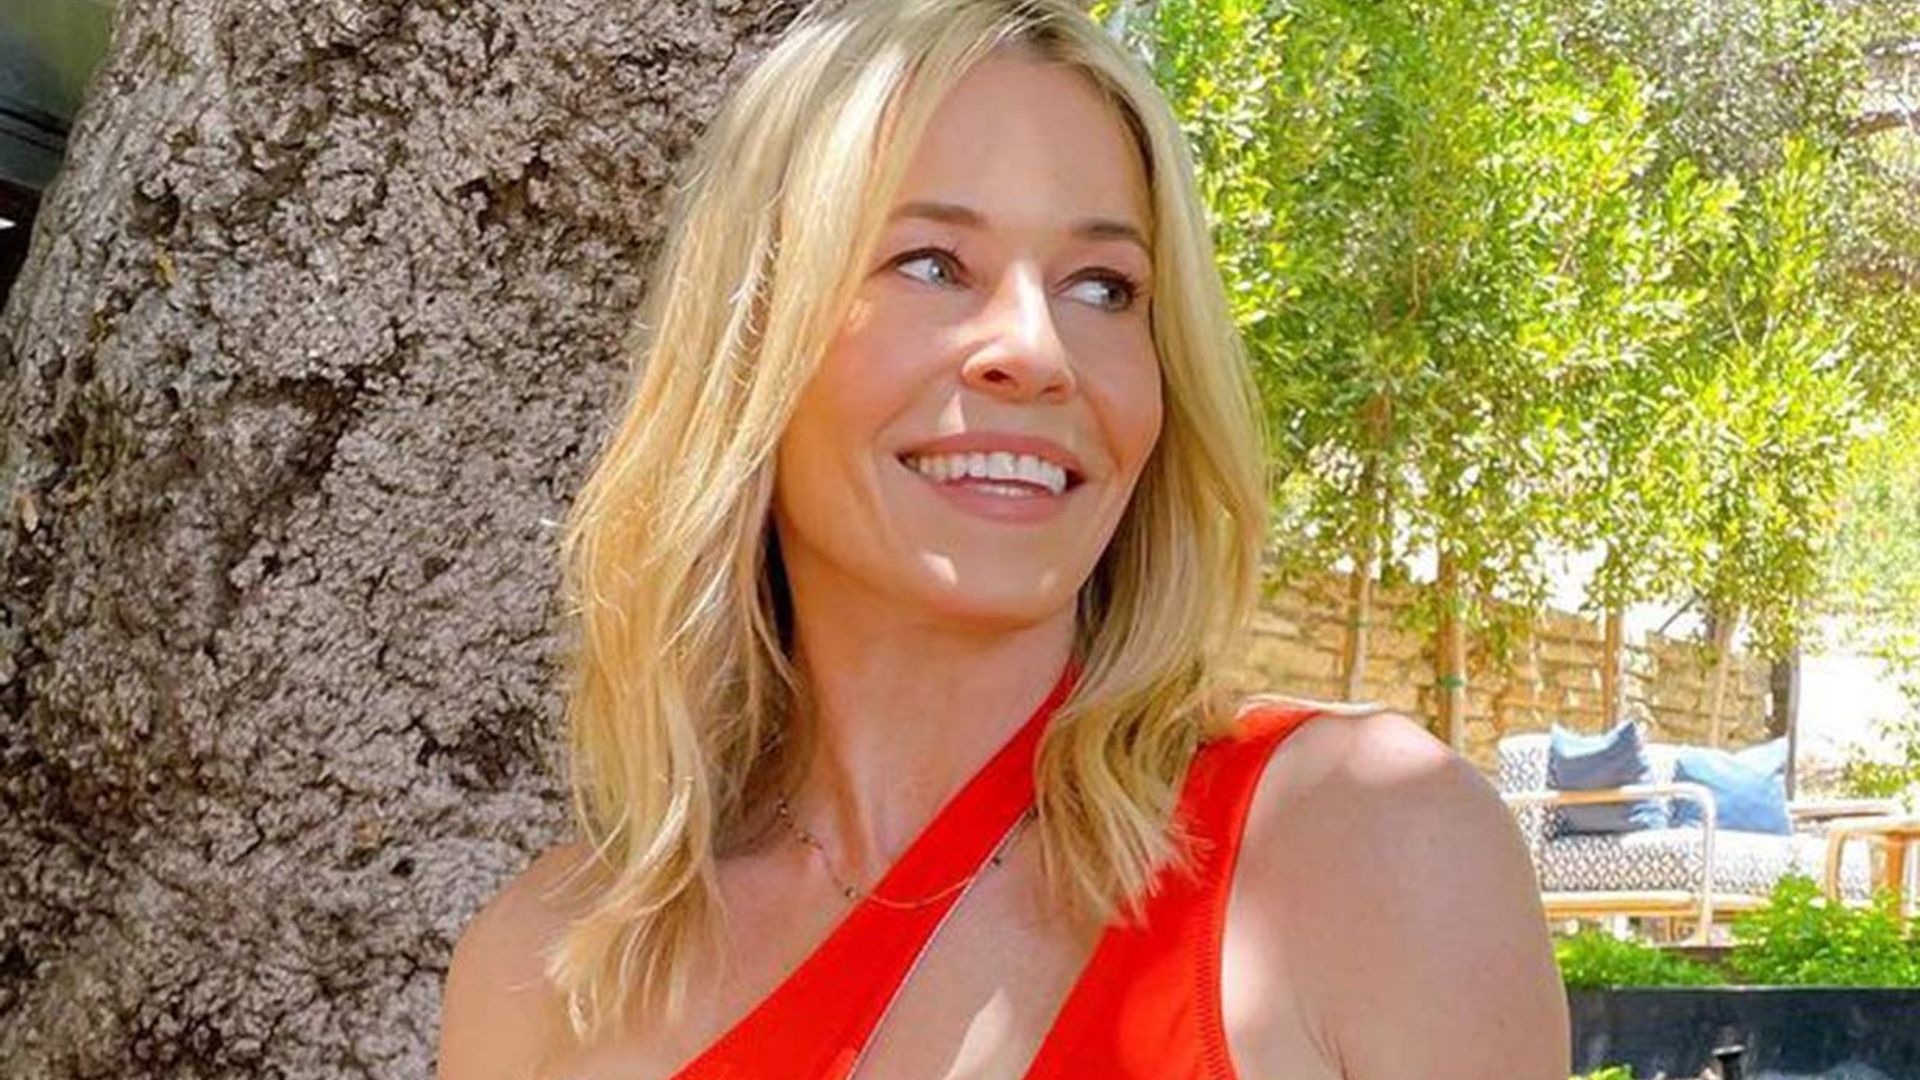 Chelsea Handler, 46, looks like a Baywatch star in bold red cutout